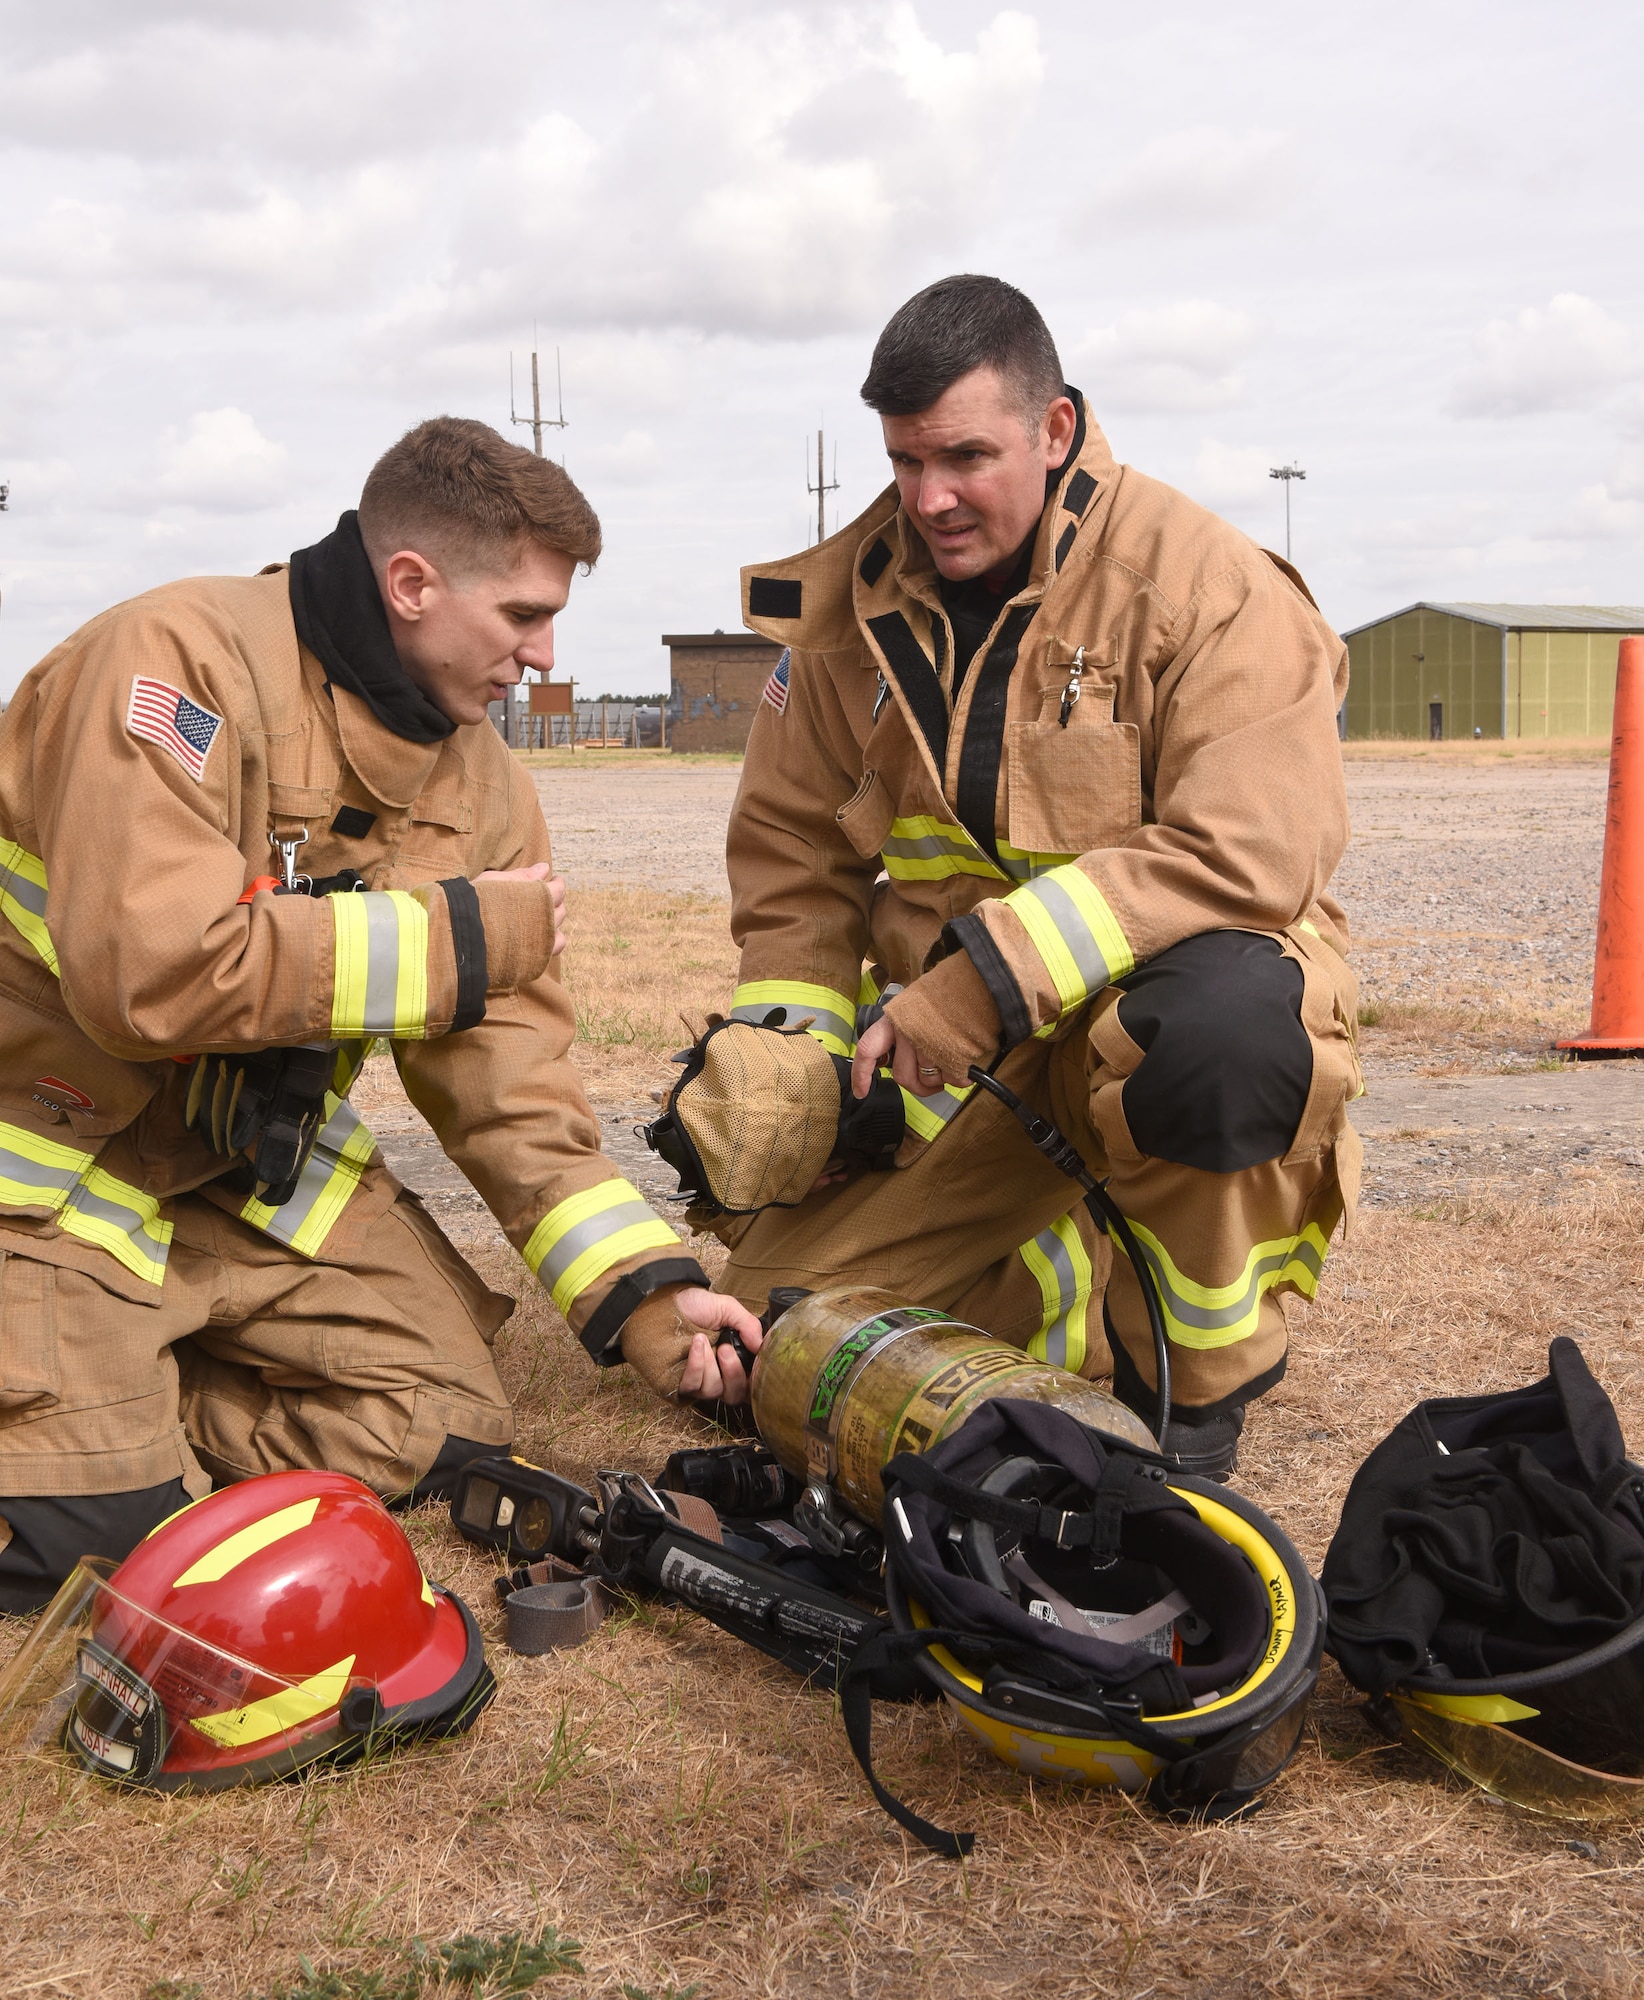 U.S. Air Force Col. Gene Jacobus, 100th Air Refueling Wing commander, right, listens as Airman 1st Class Monty Stingley, 100th Civil Engineer Squadron Fire Department firefighter, explains how to safely operate the breathing apparatus and protective equipment before beginning live-fire training on Royal Air Force Mildenhall, England, July 28, 2022. The first-hand experience gave the commander a greater insight as to how much training and preparation the base firefighters undertake on a regular basis to ensure they are prepared for any emergency. (U.S. Air Force photo by Karen Abeyasekere)